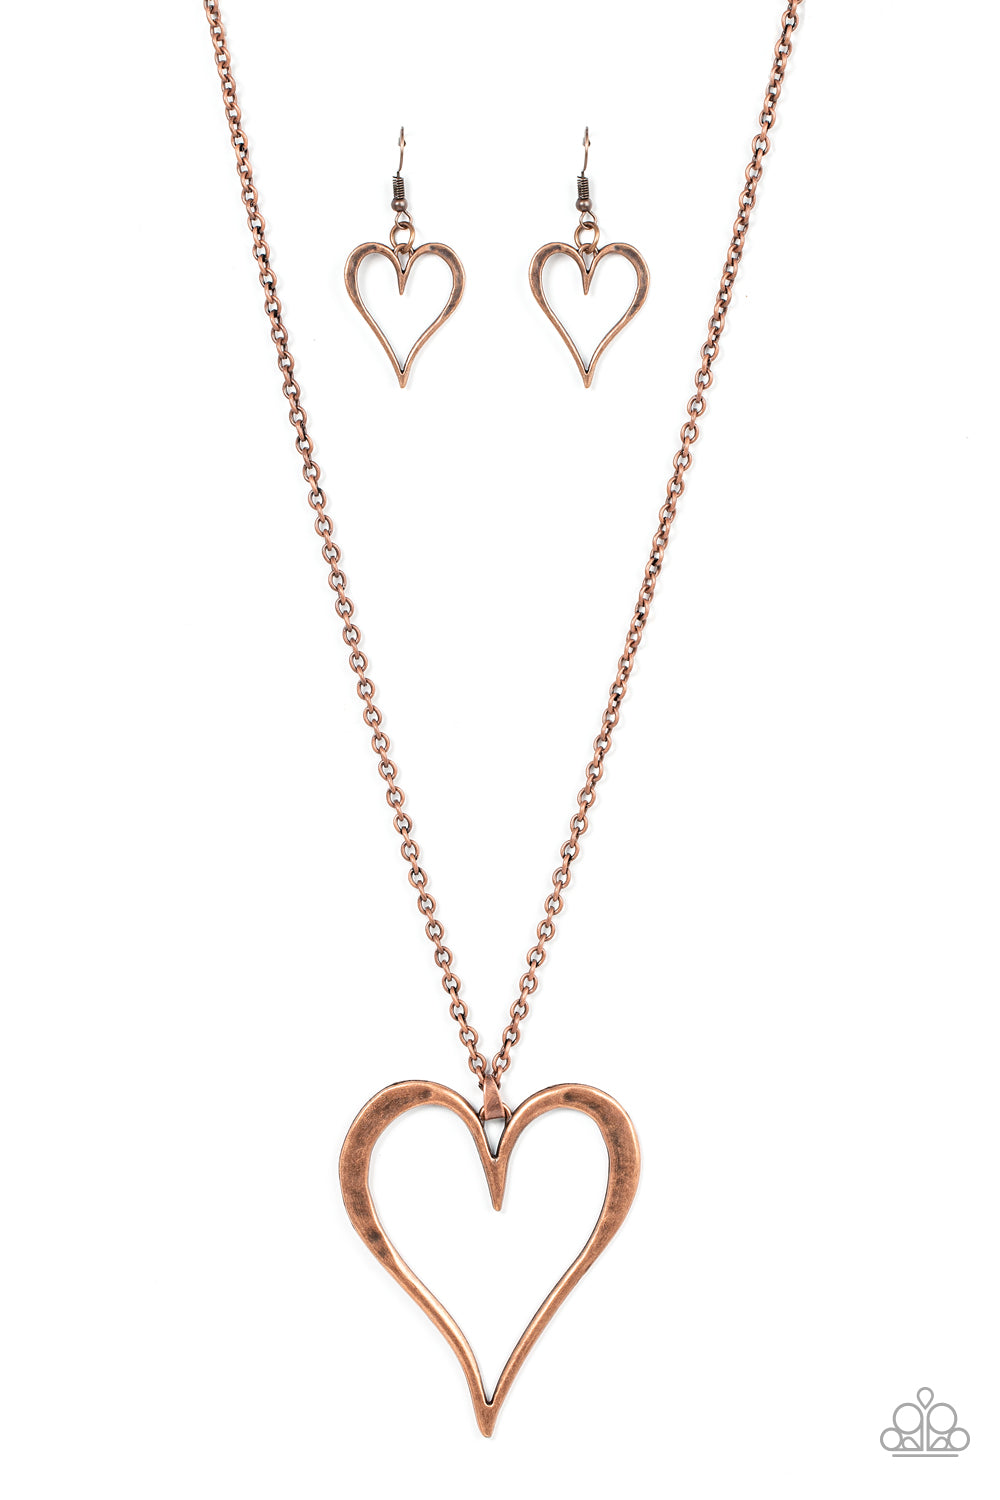 Hopelessly In Love - Copper Heart - A Finishing Touch Jewelry